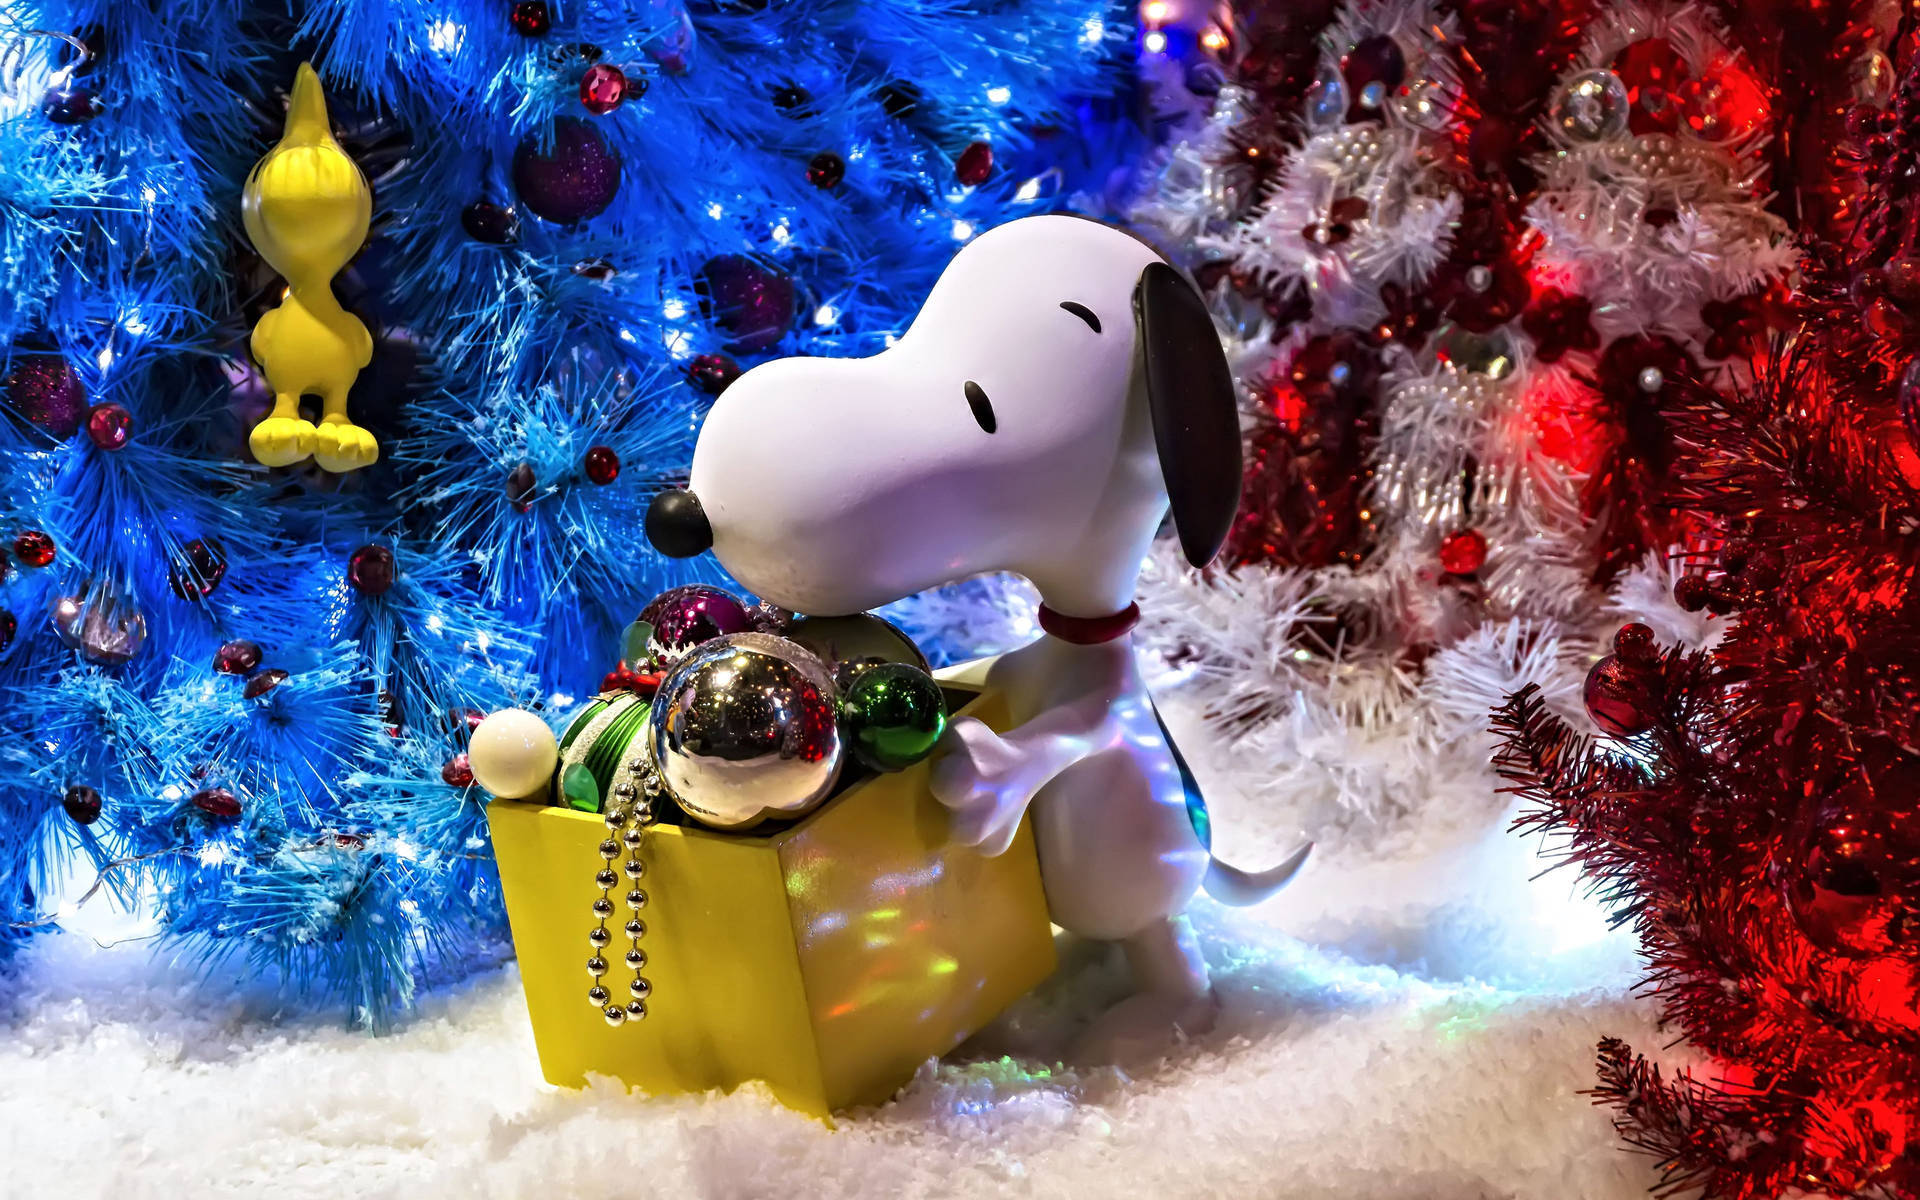 Enjoy the festivities this holiday season with Snoopy! Wallpaper